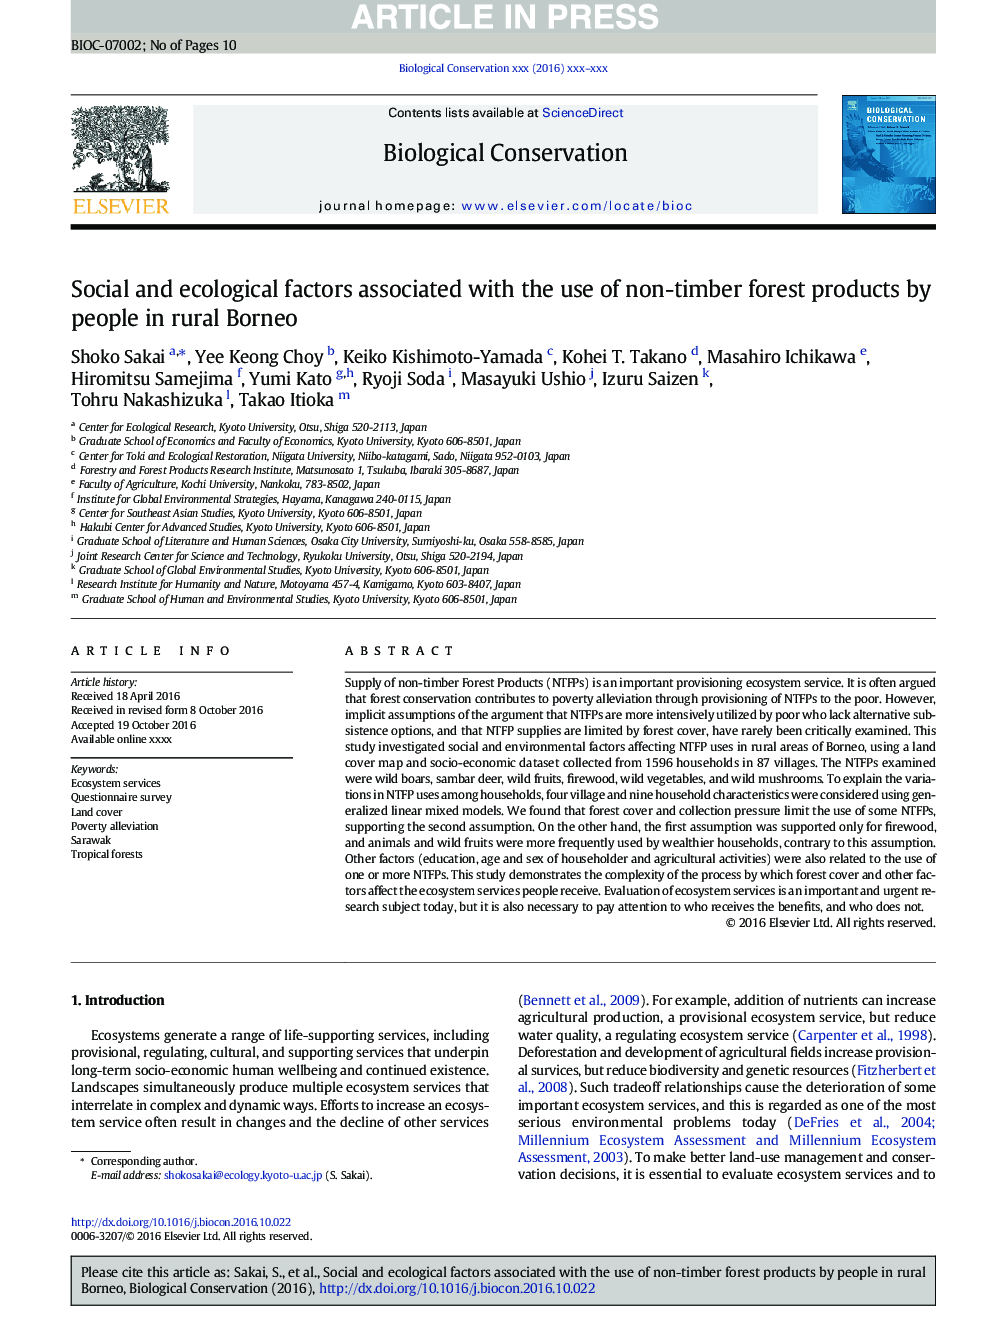 Social and ecological factors associated with the use of non-timber forest products by people in rural Borneo